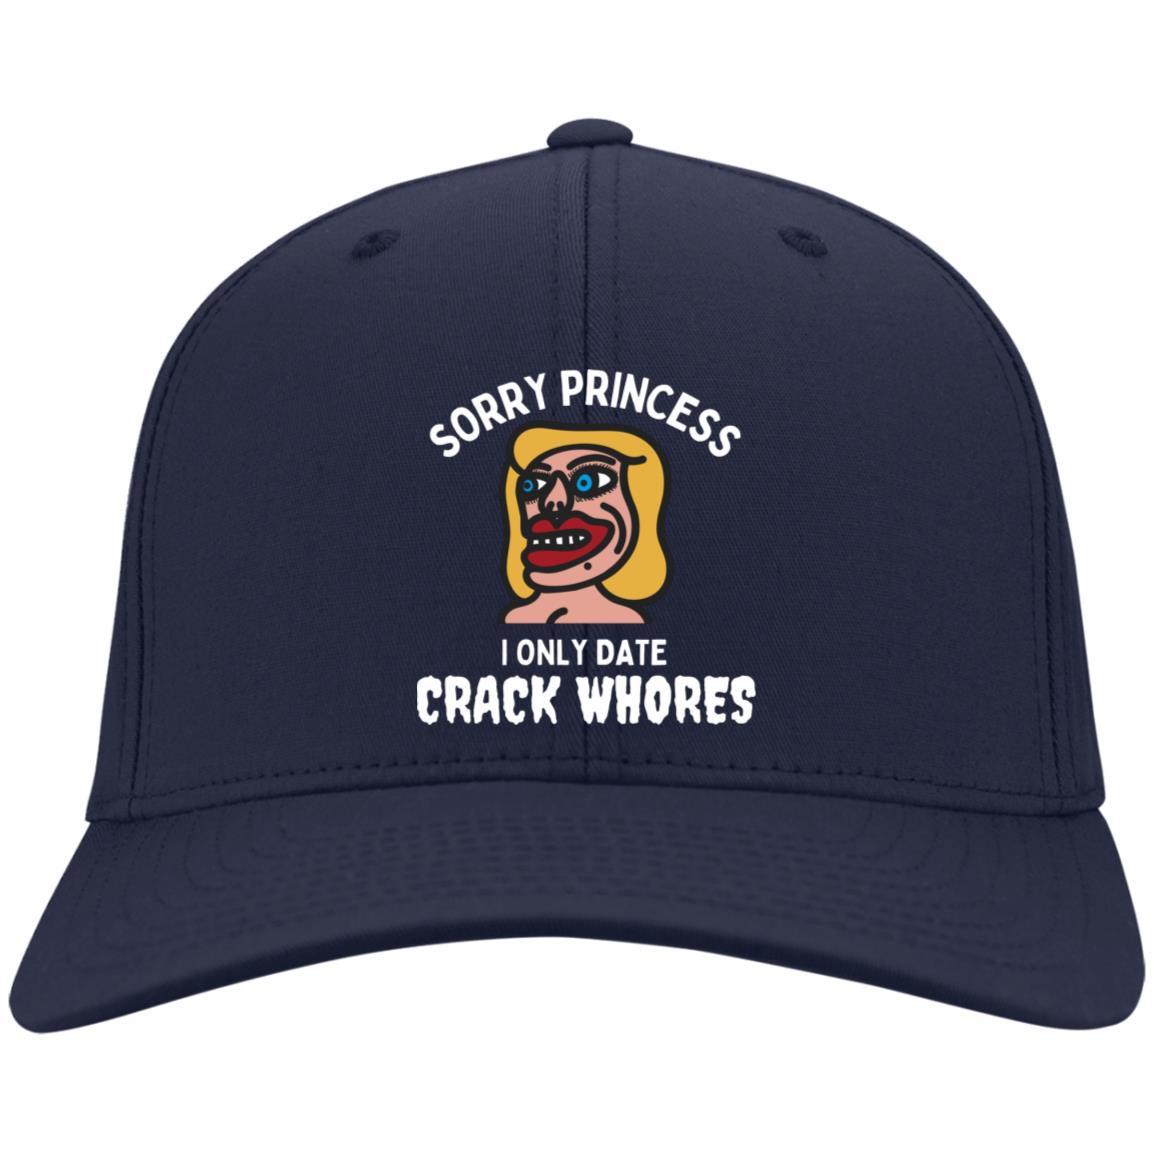 Sorry Princess I Only Date Crack Adult Humor Twill Cap